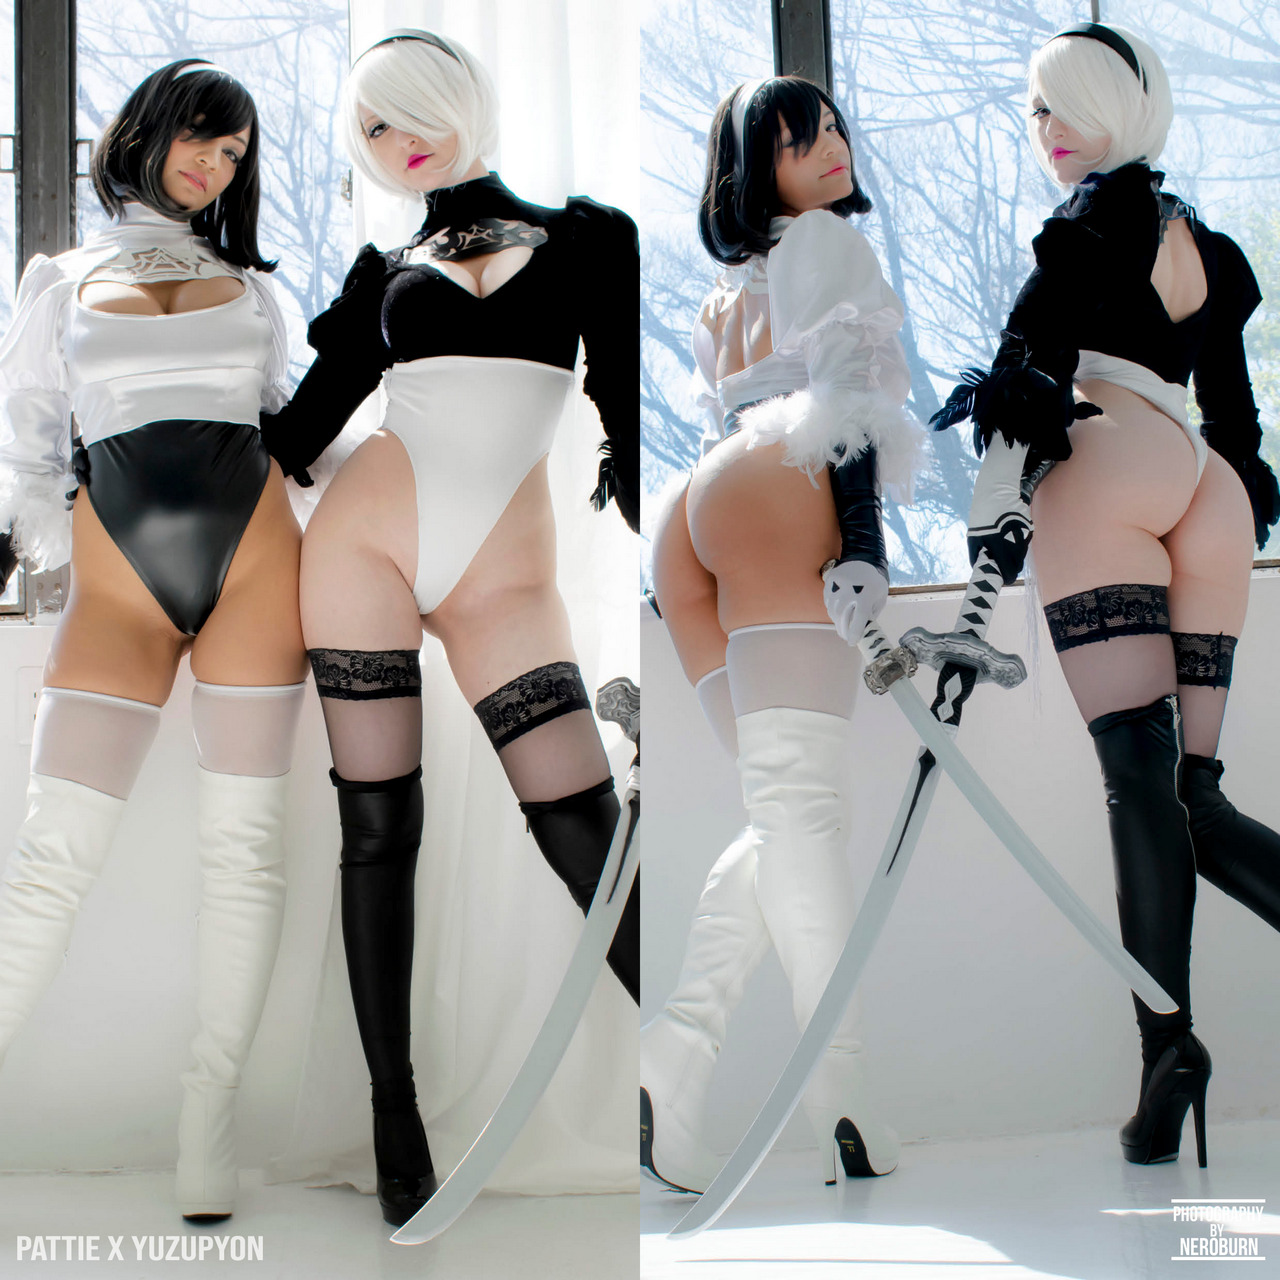 2b X 2p Cosplay By Yuzupyon And Pattie My Friend And I Wanted To Make Both Version Like In The Gam